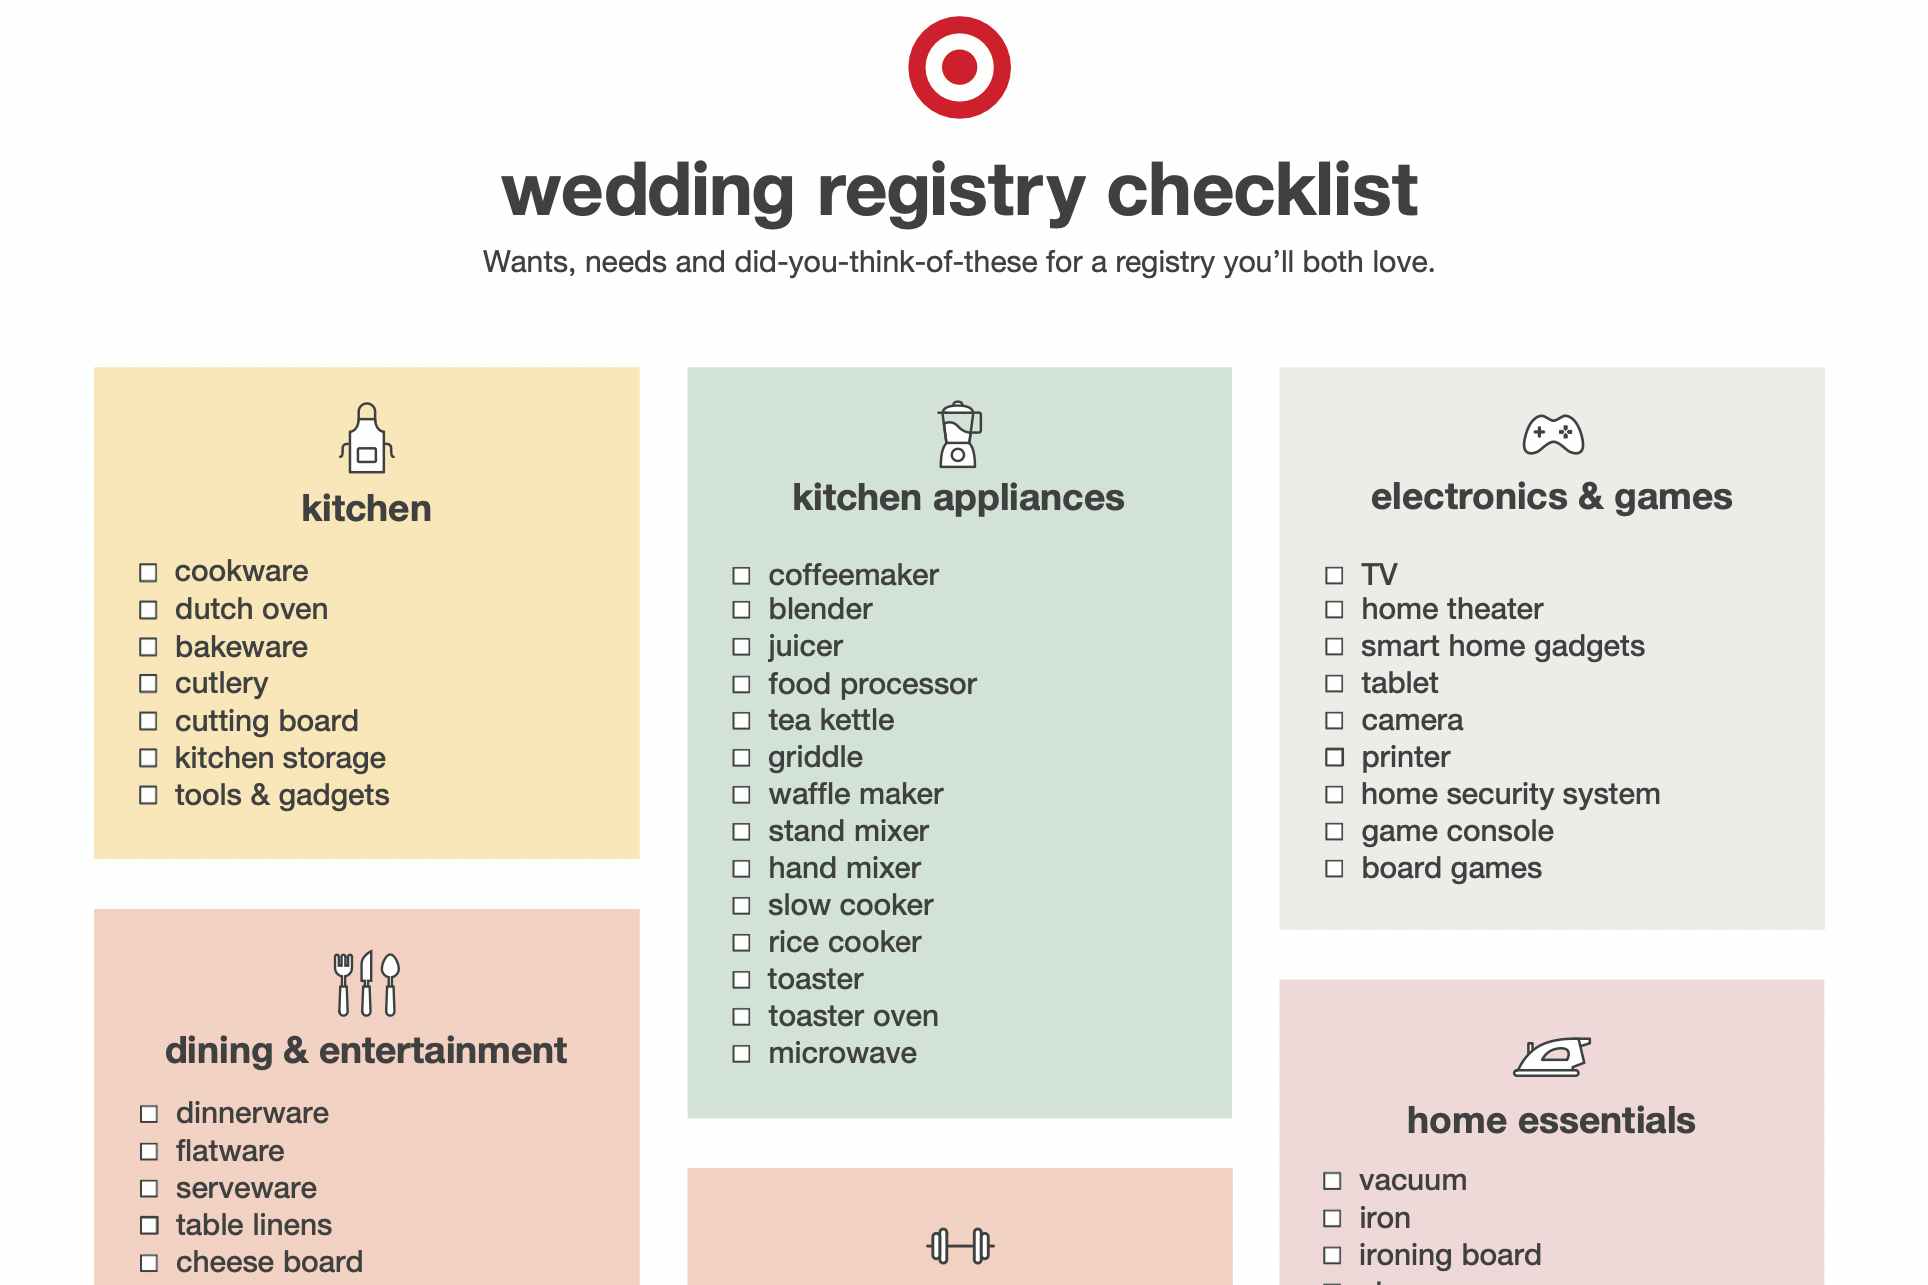 The Ultimate Wedding Registry Experience from Target